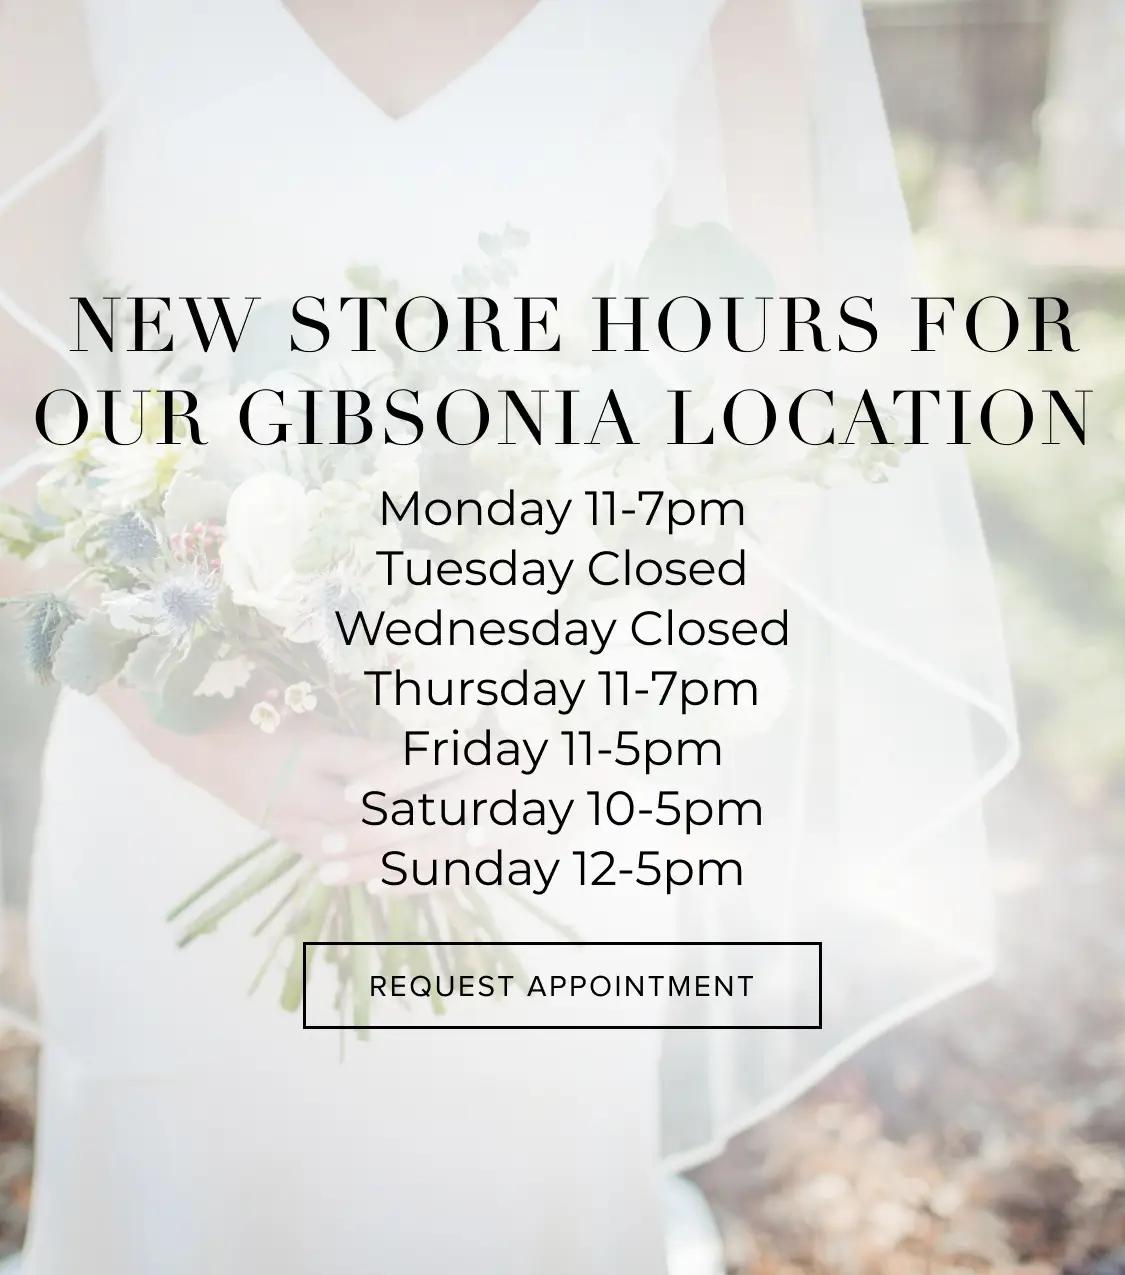 New Store Hours for Gibsonia